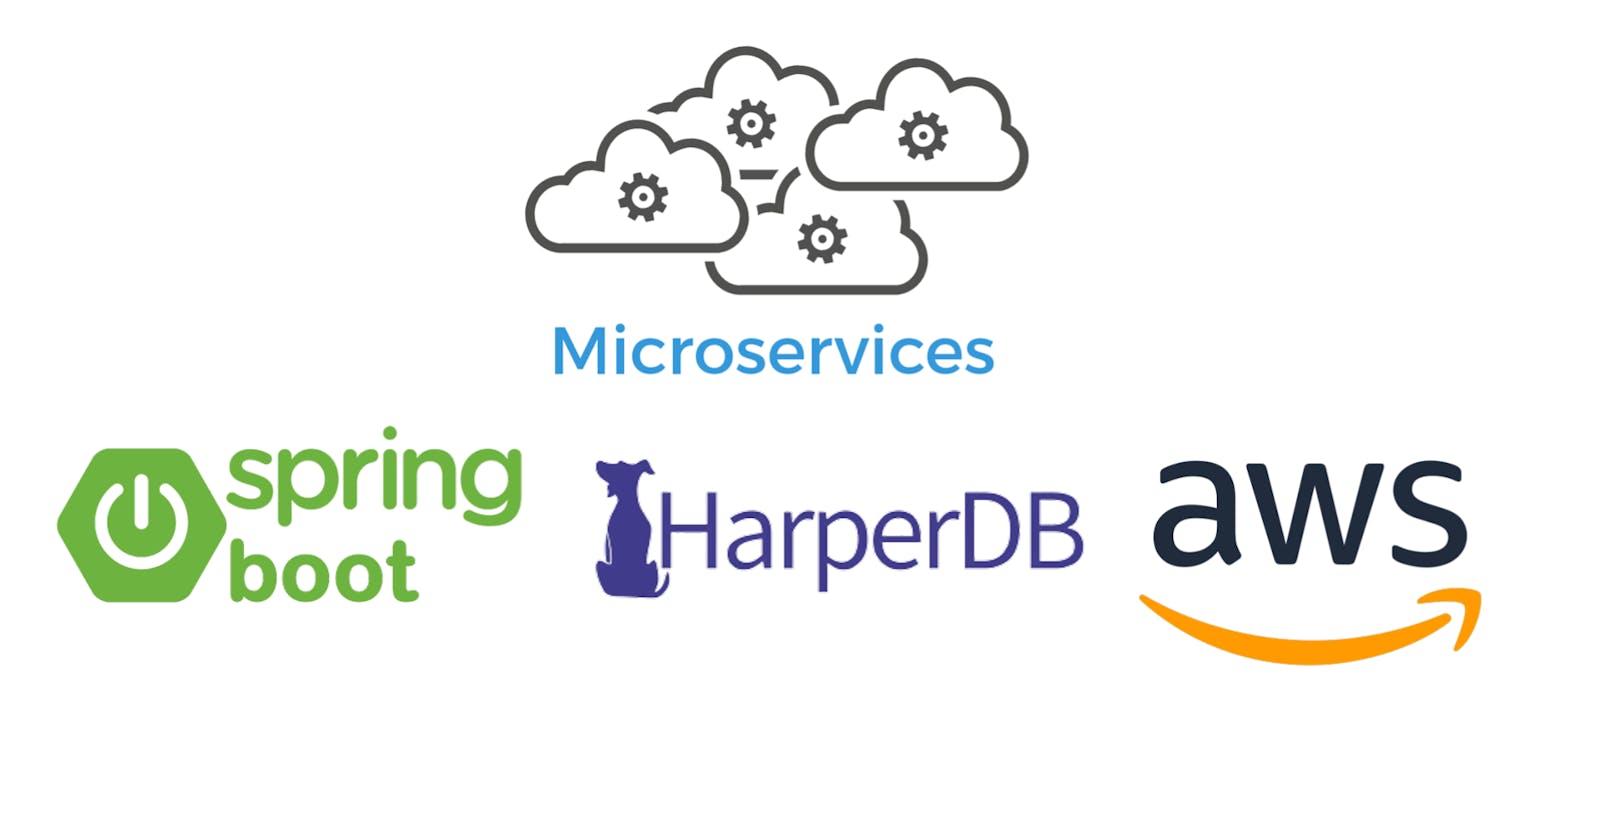 Building Microservices using Spring Boot + HarperDB and Deploying it on AWS